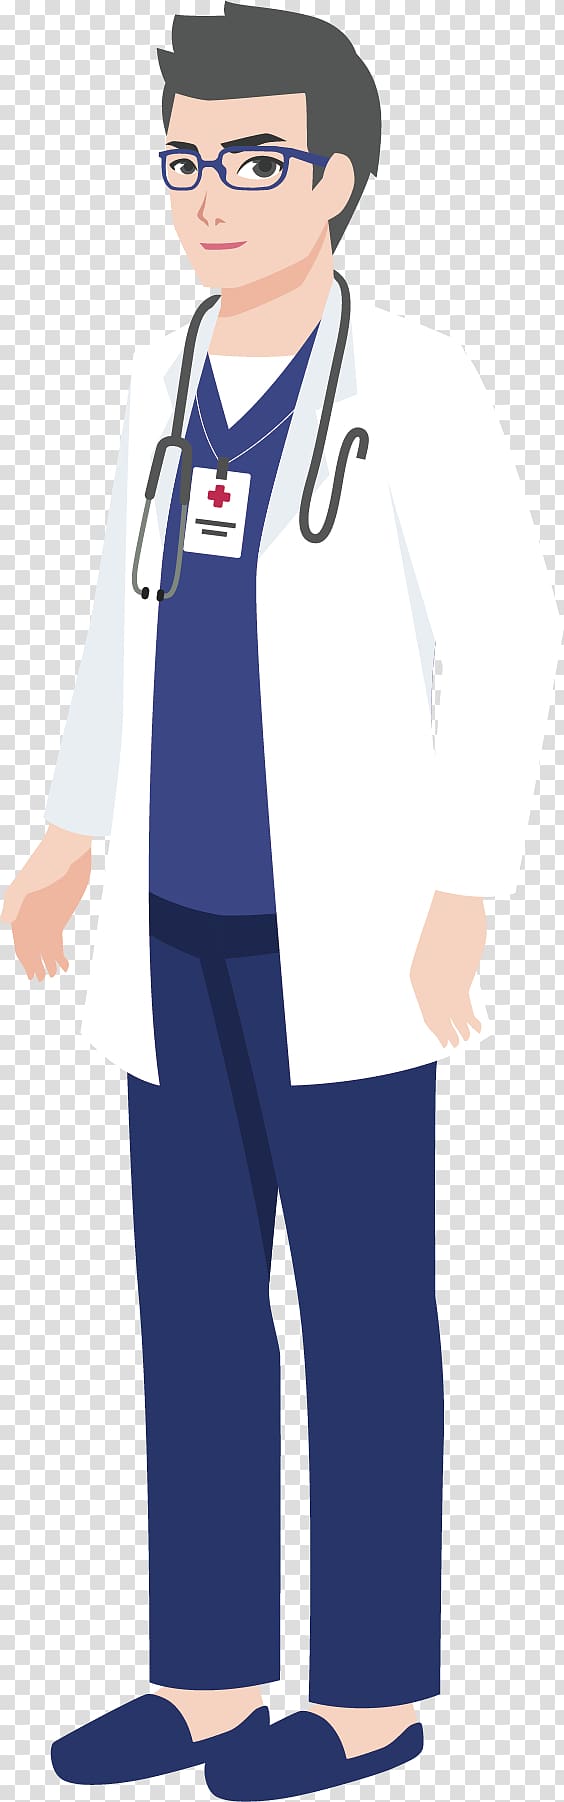 man wearing white long-sleeved top, blue pants, and stethoscope illustration, Cartoon Physician Illustration, University doctor transparent background PNG clipart